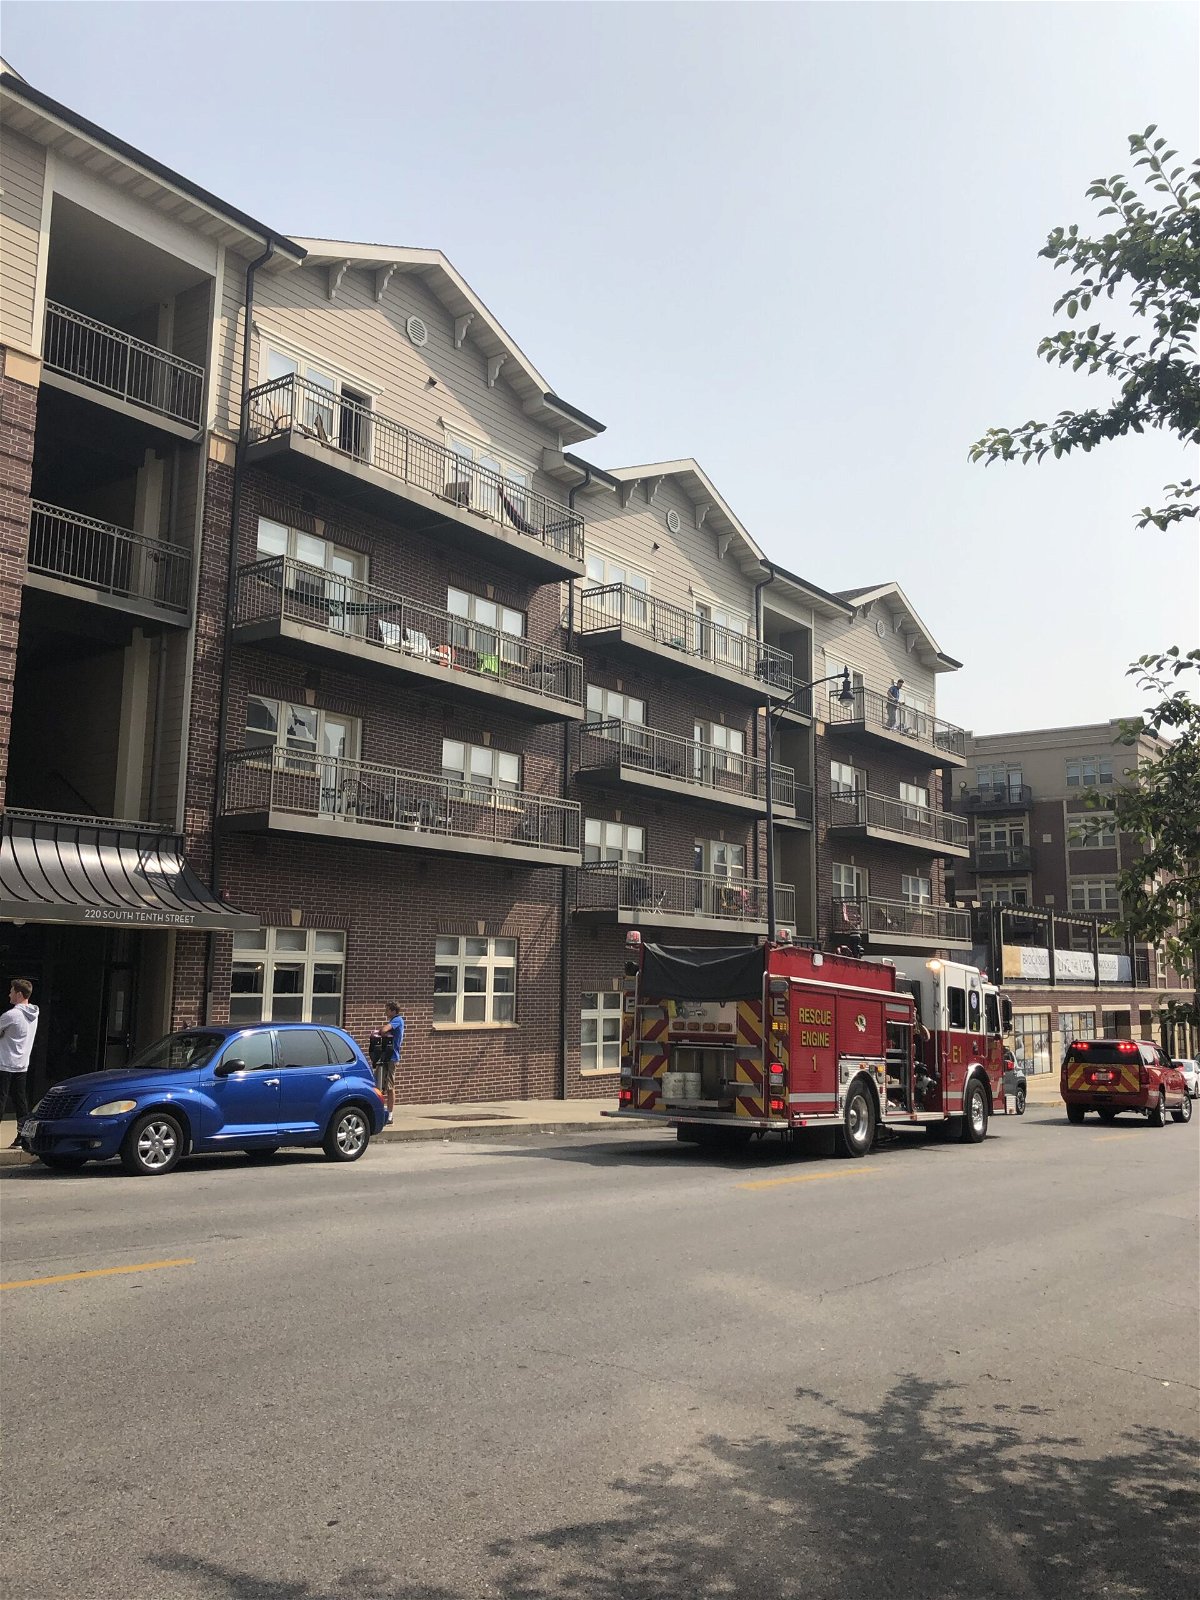 Firefighters respond to Brookeside Downtown for a dryer fire